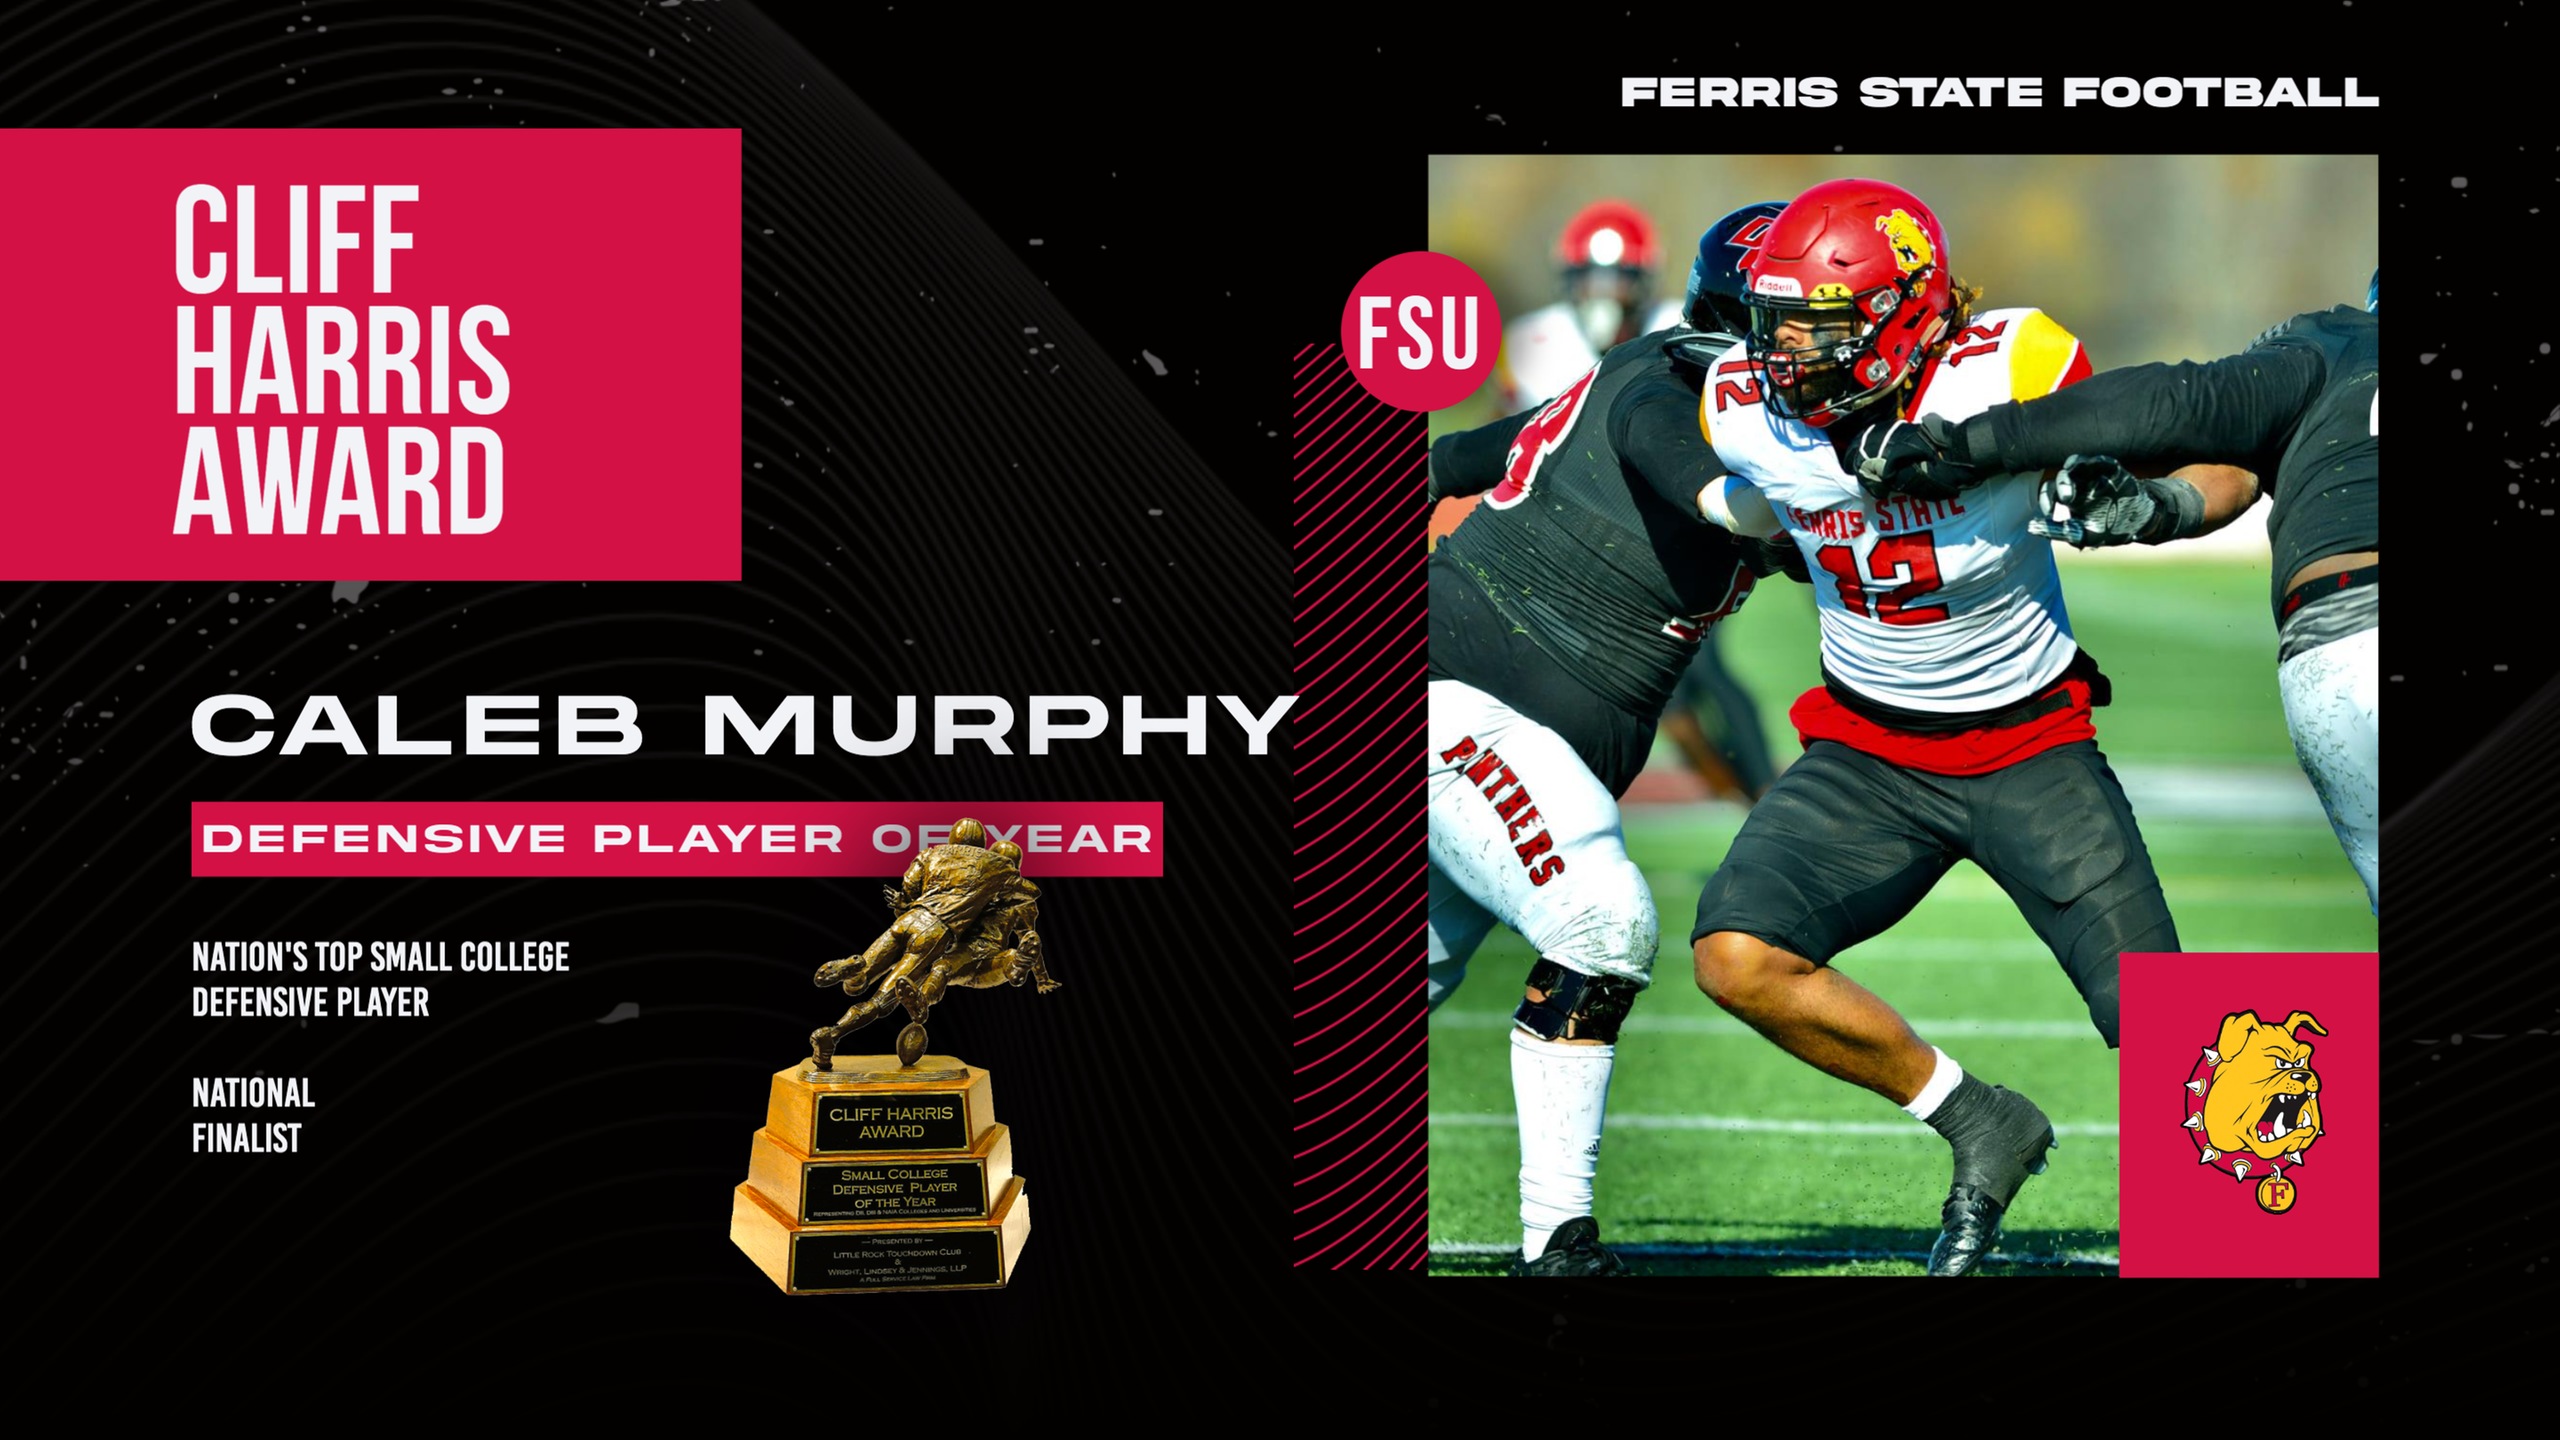 Ferris State's Caleb Murphy Tabbed As National Finalist For Cliff Harris Award